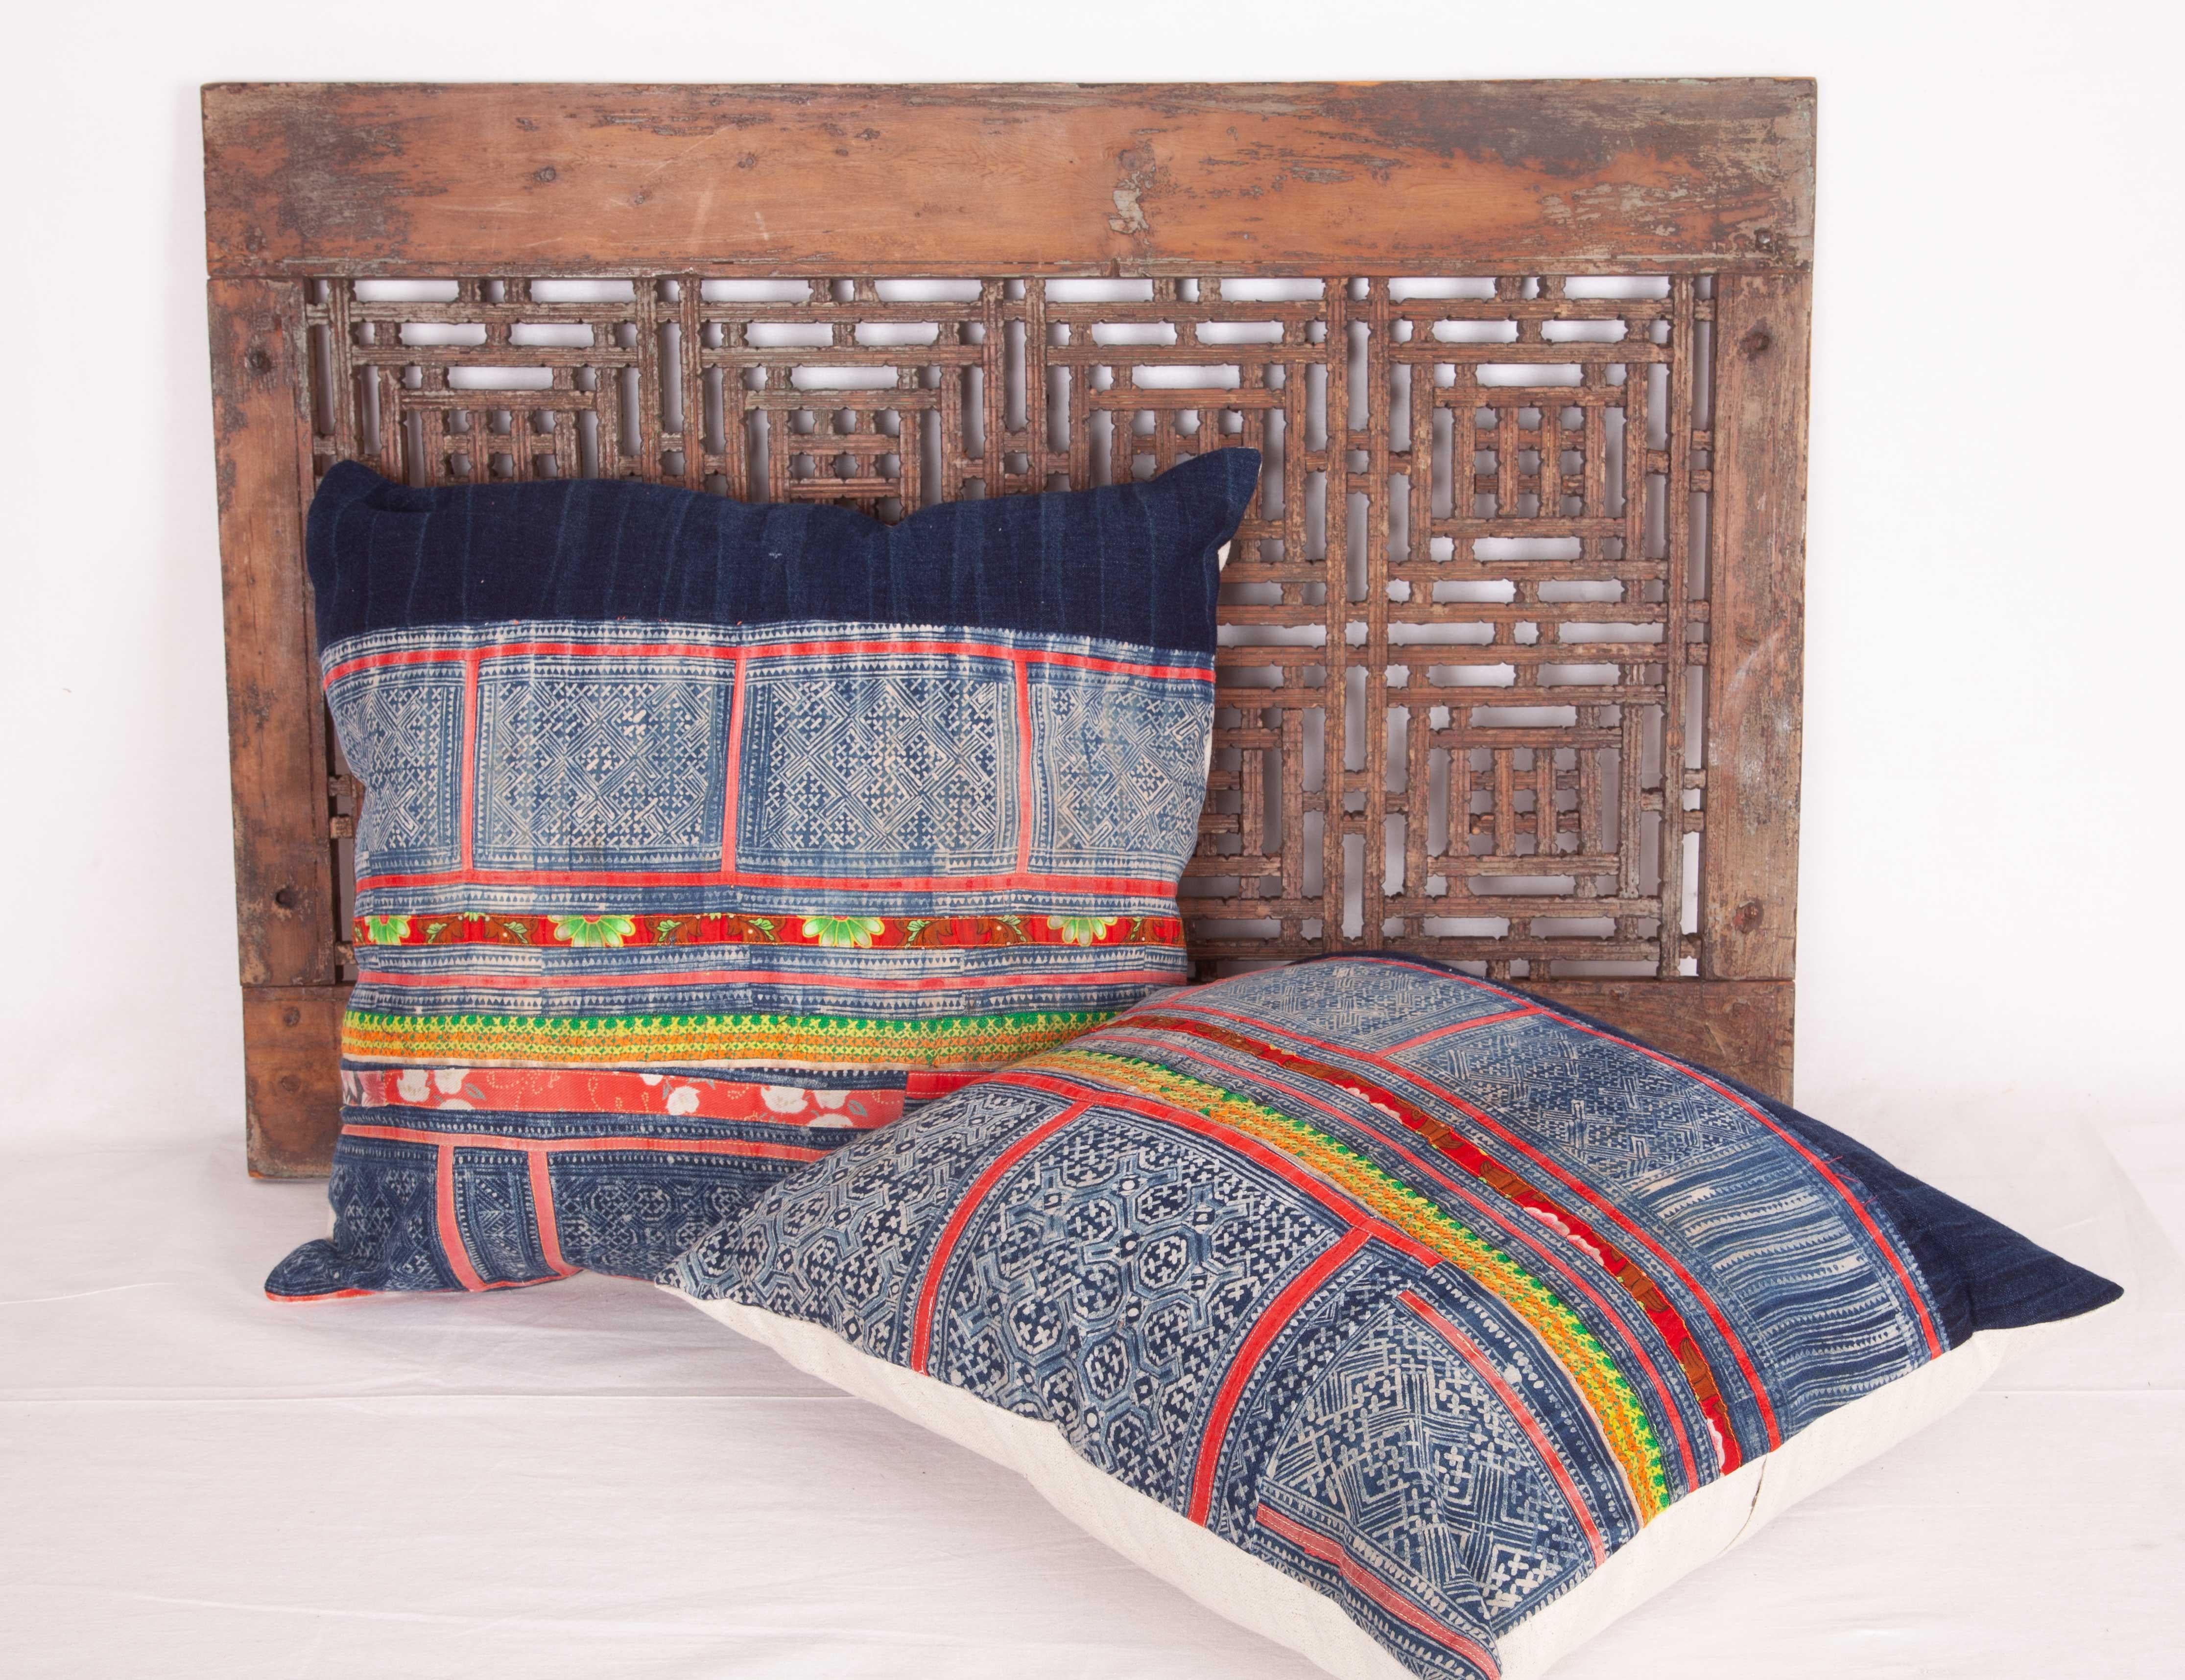 20th Century Vintage Pillow Cases / Cushions Made from a Hmong Hill Tribe Batik Textile